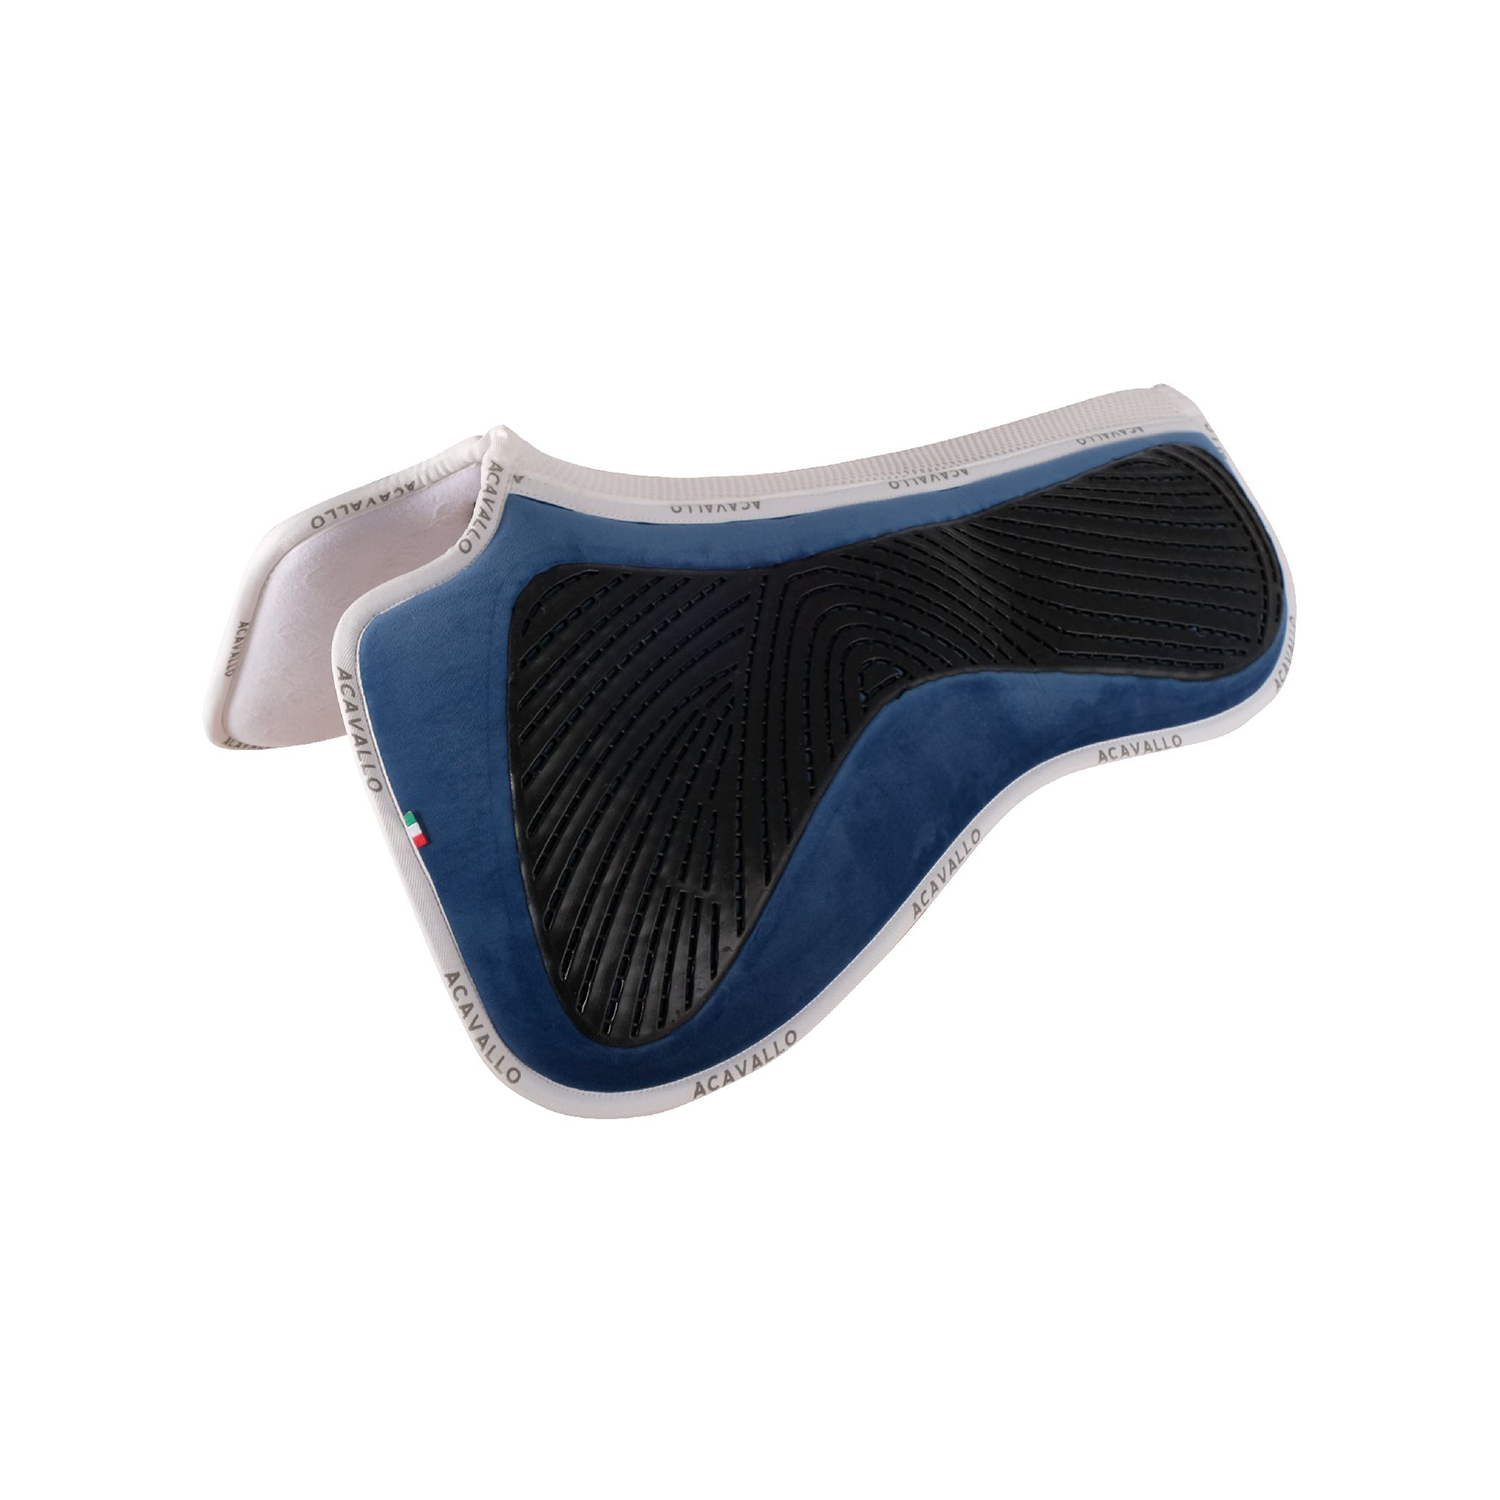 ACavallo Spine Free, Double-Face Gel/Silicon Grip System & Memory Foam, Dressage